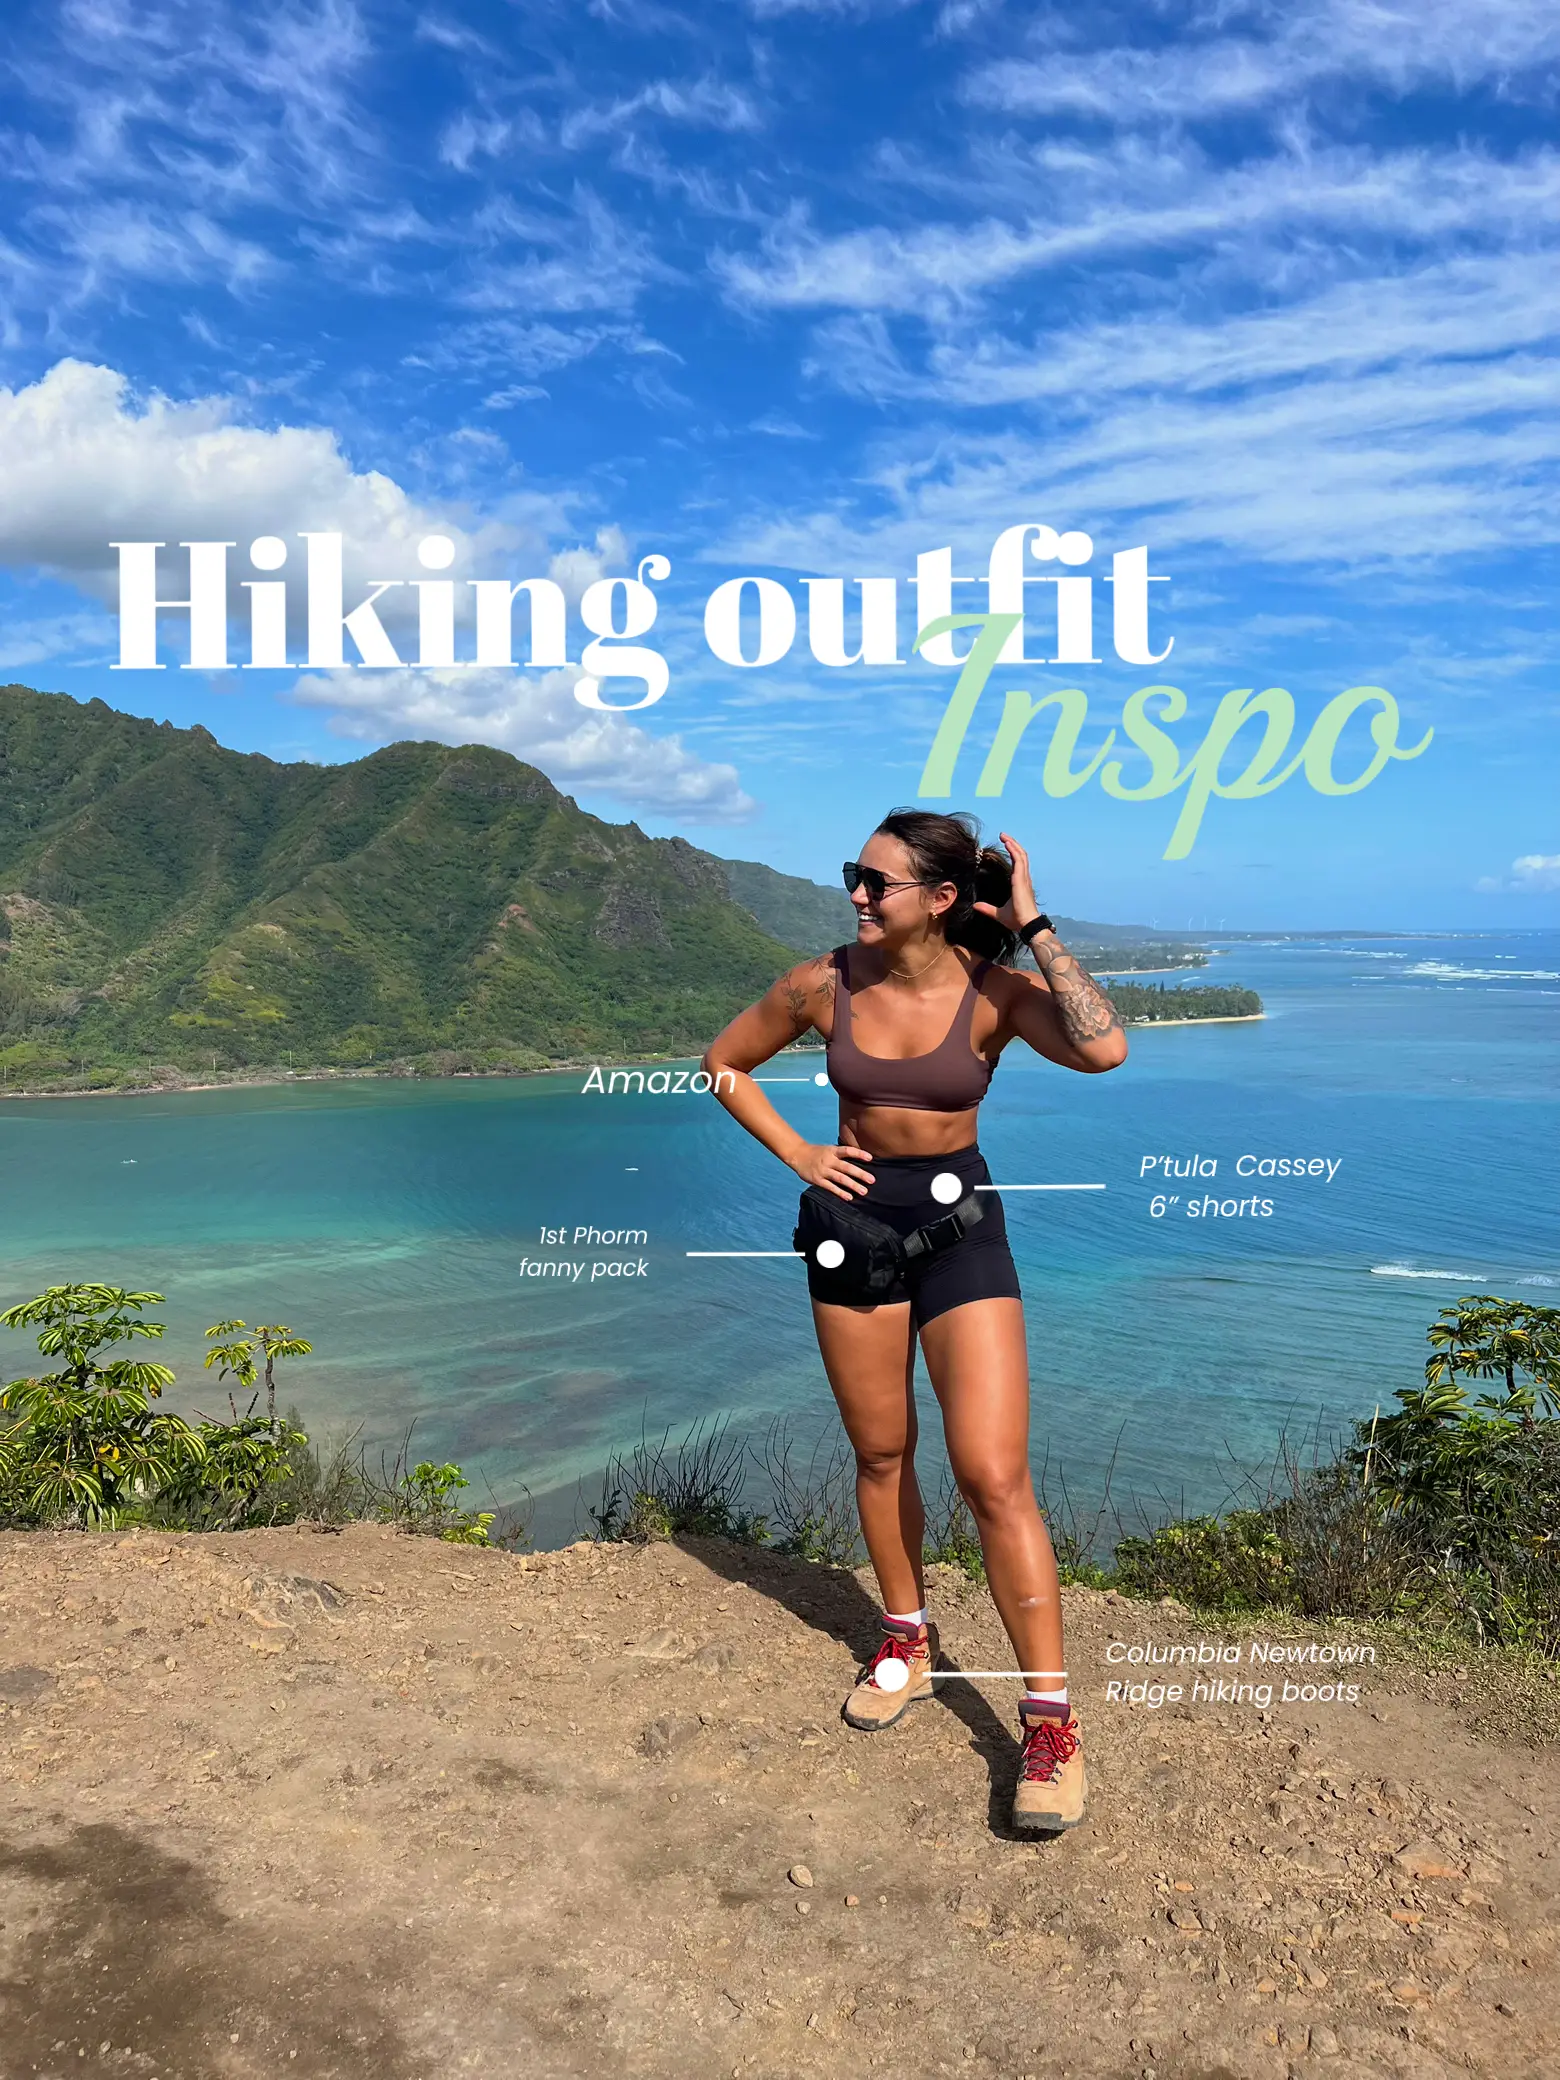 Hiking outfit inspo ⛰️, Gallery posted by Caitlyn Block